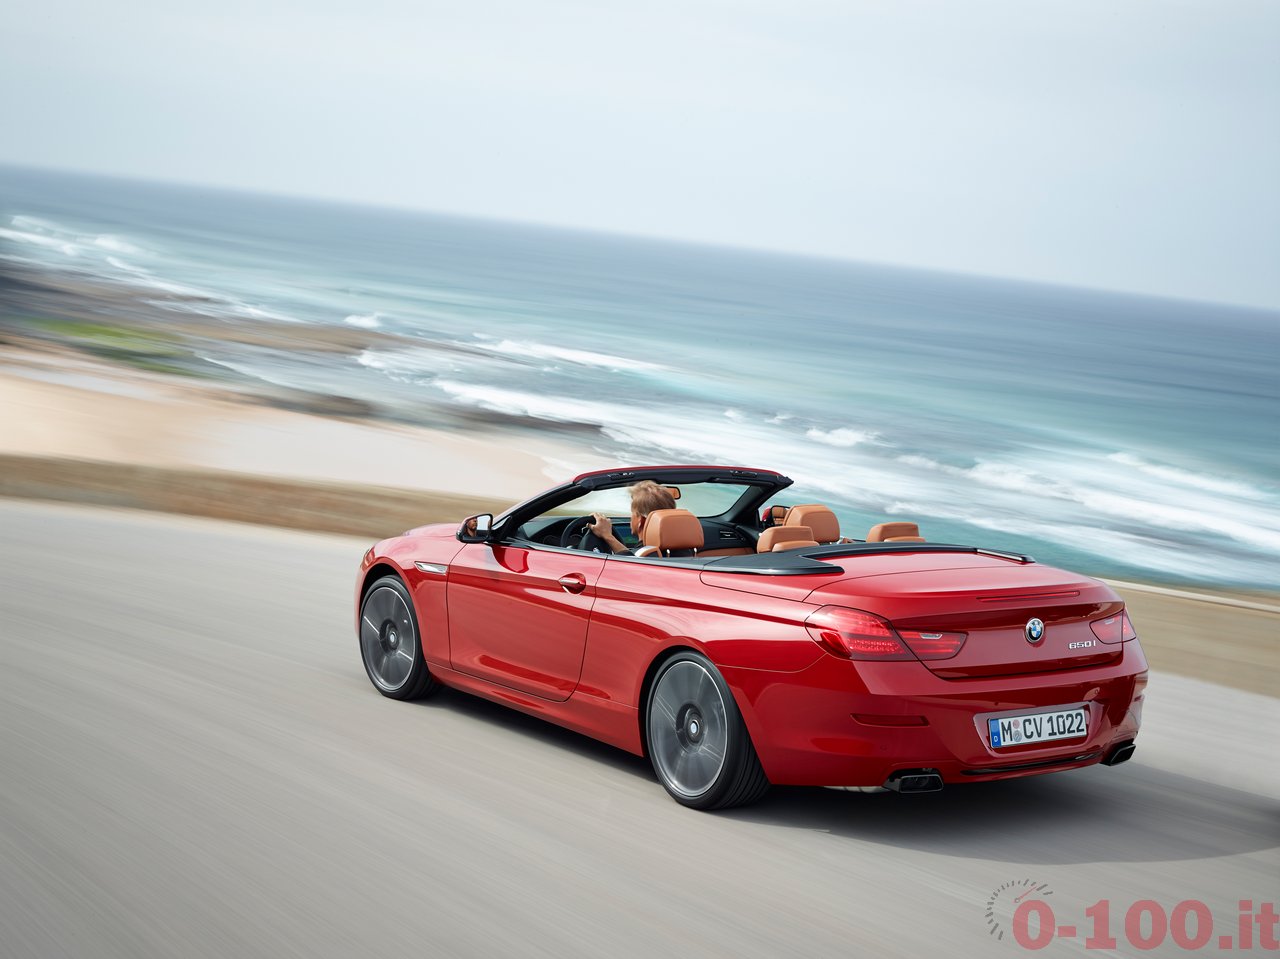 BMW-series-6-model-year-2015-gran-coupe-cabriolet-naias-detroit-0-100_31